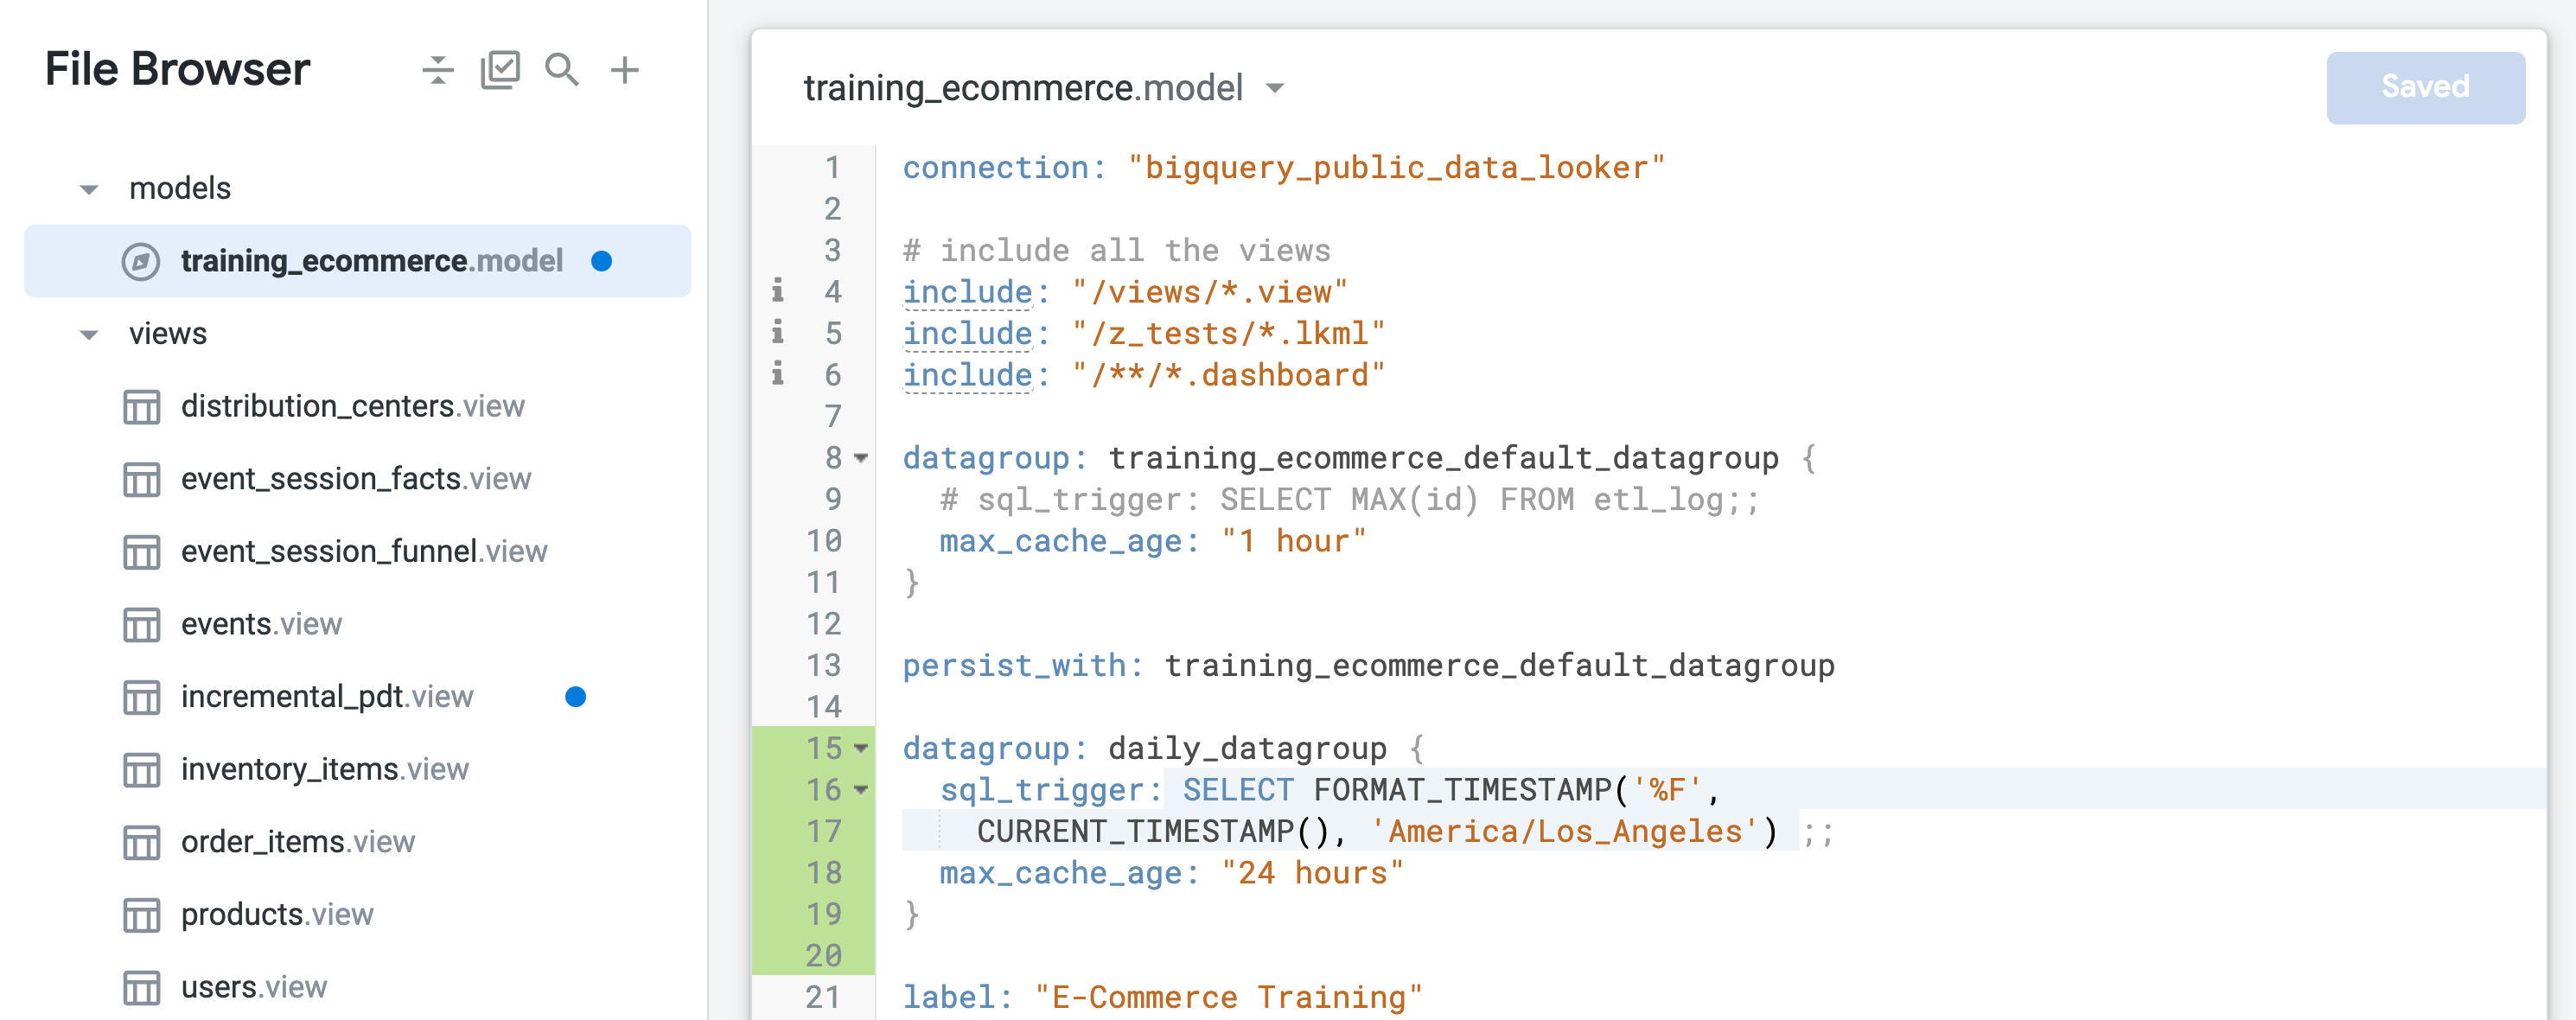 The open training_ecommerce.model file displaying lines one to 21